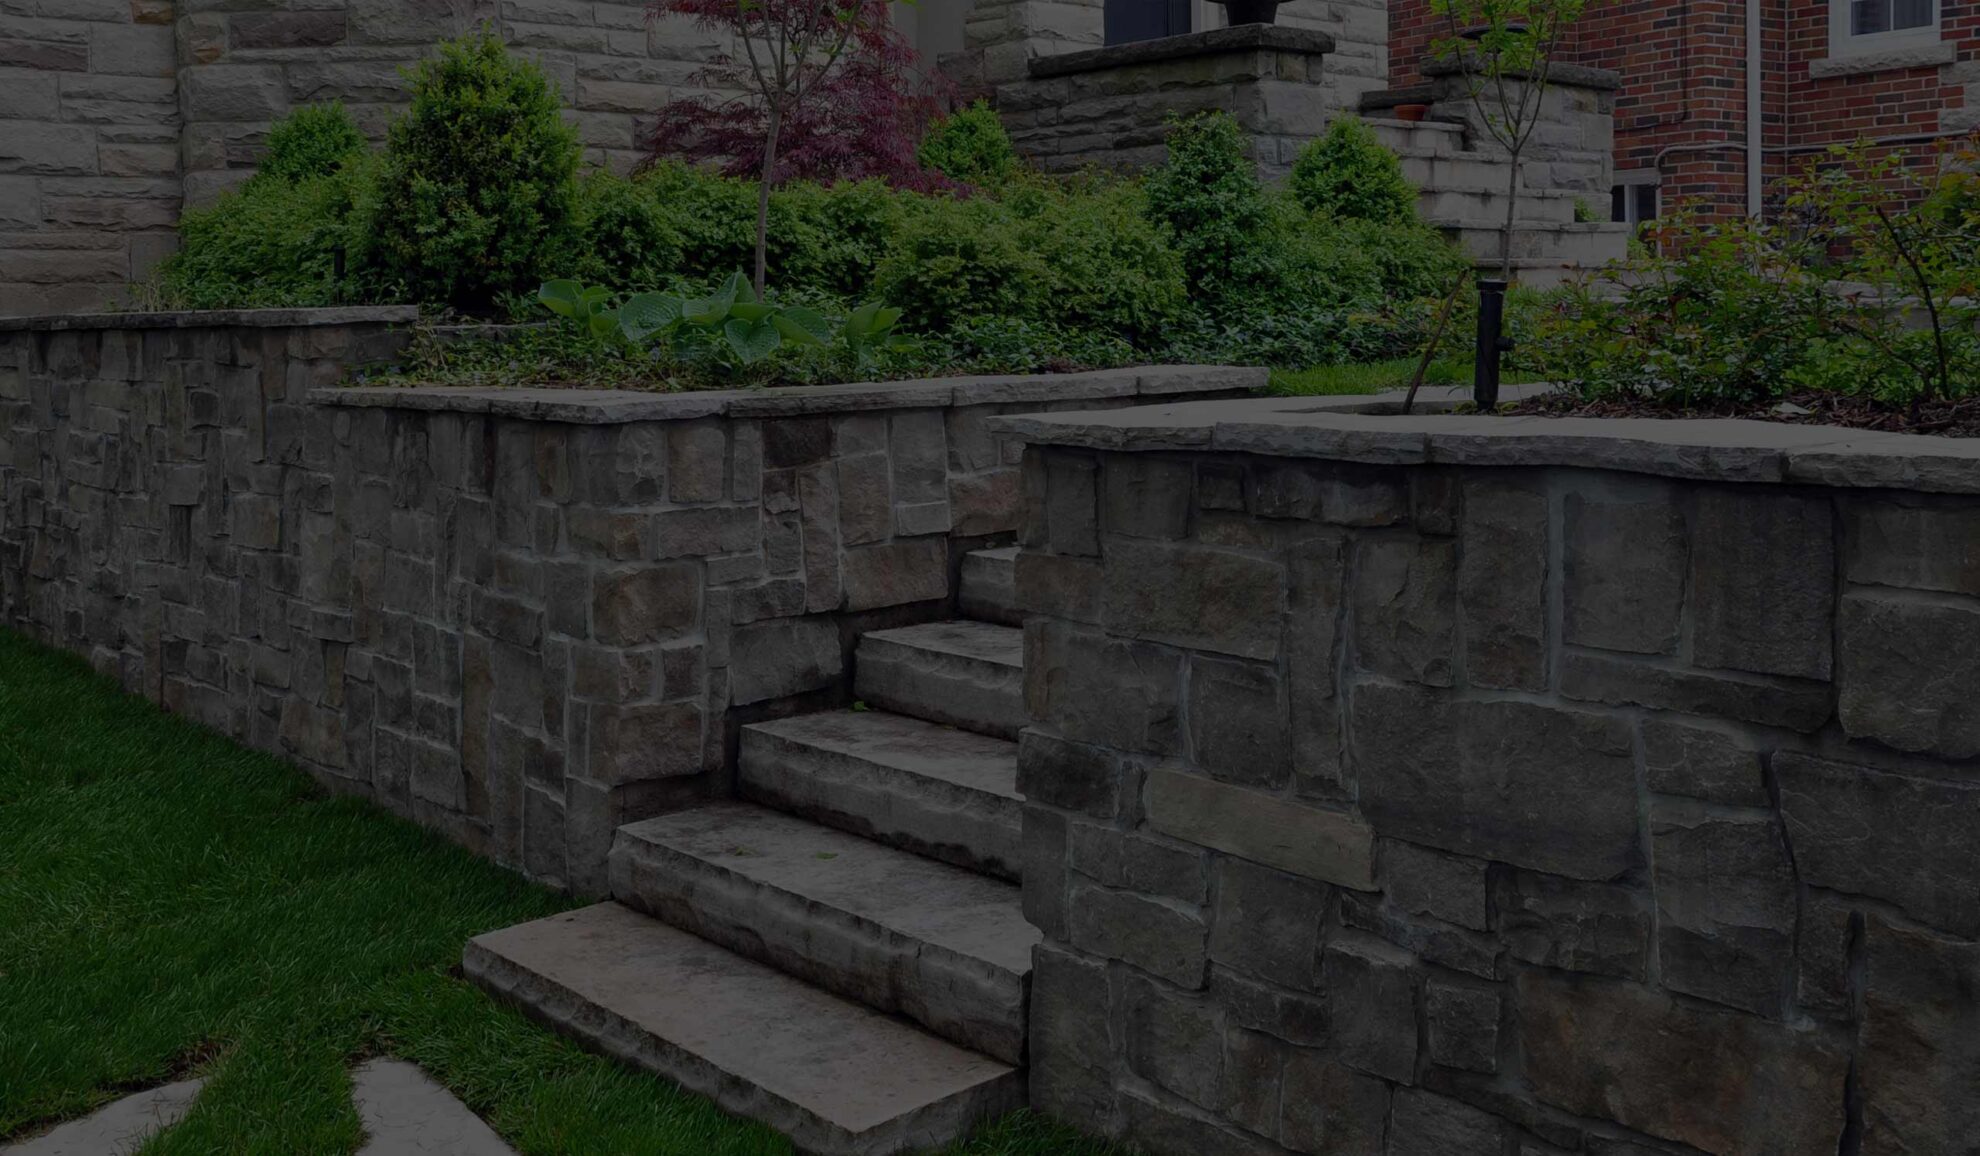 natural stone retaining wall with steps included at house garden overland park ks